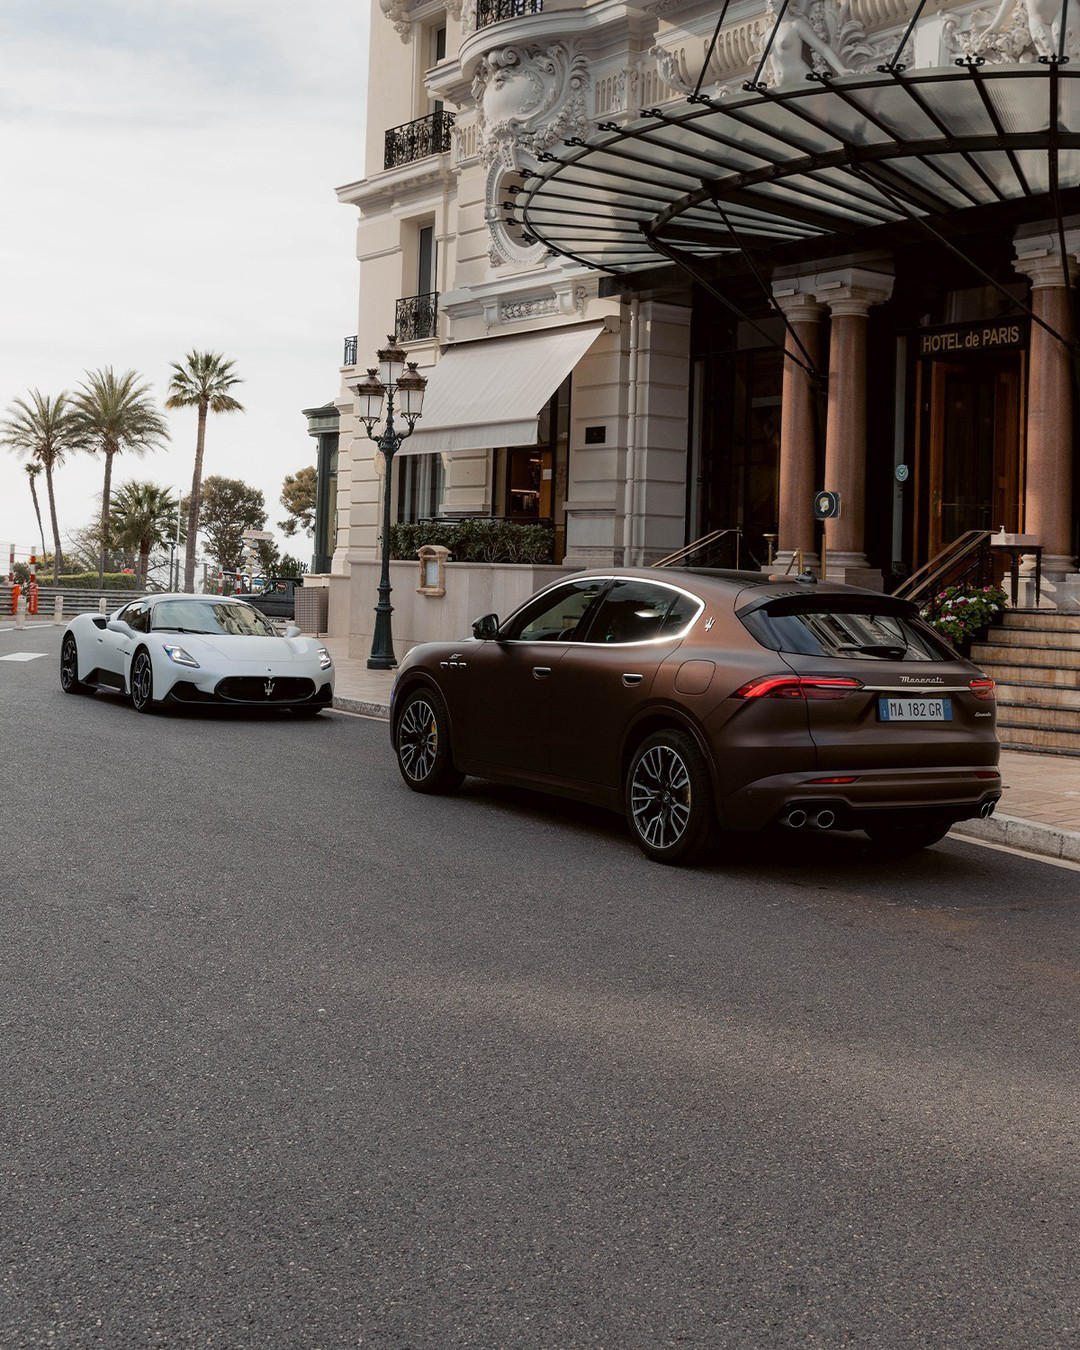 Maserati - Which would you take out for a drive around Monaco